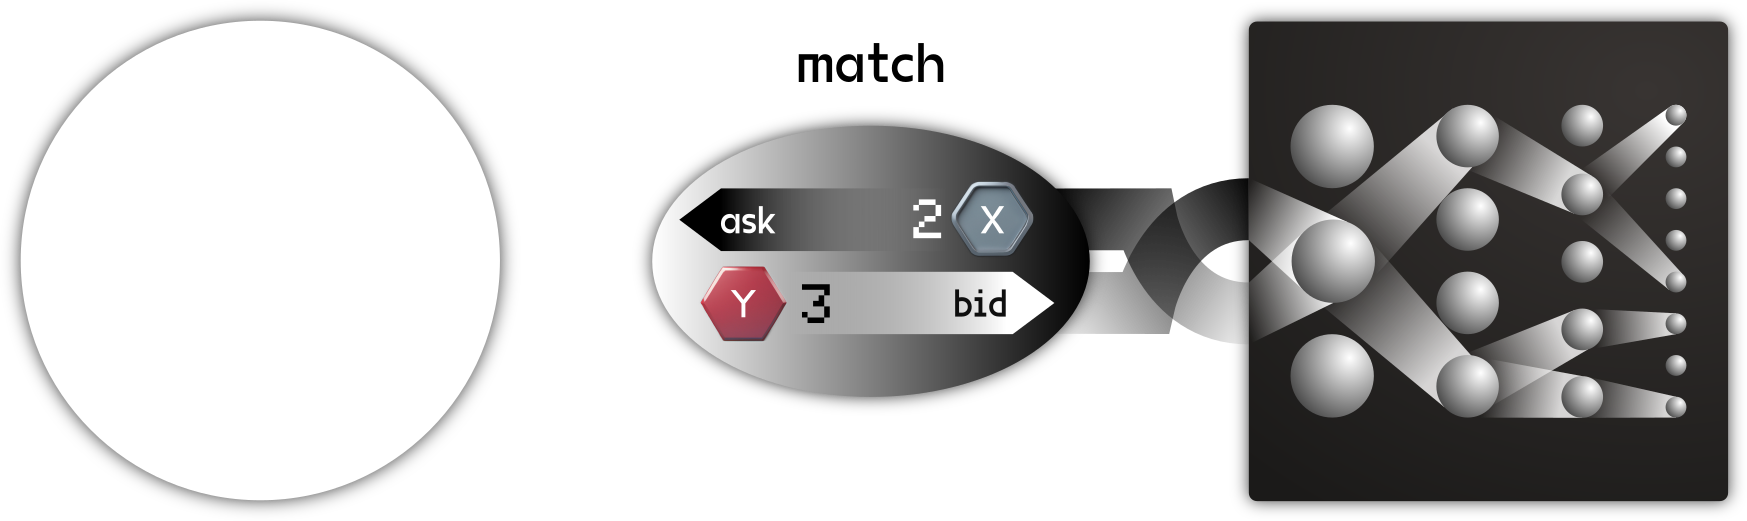 Figure 10.12 Network matches commodity exchange offer